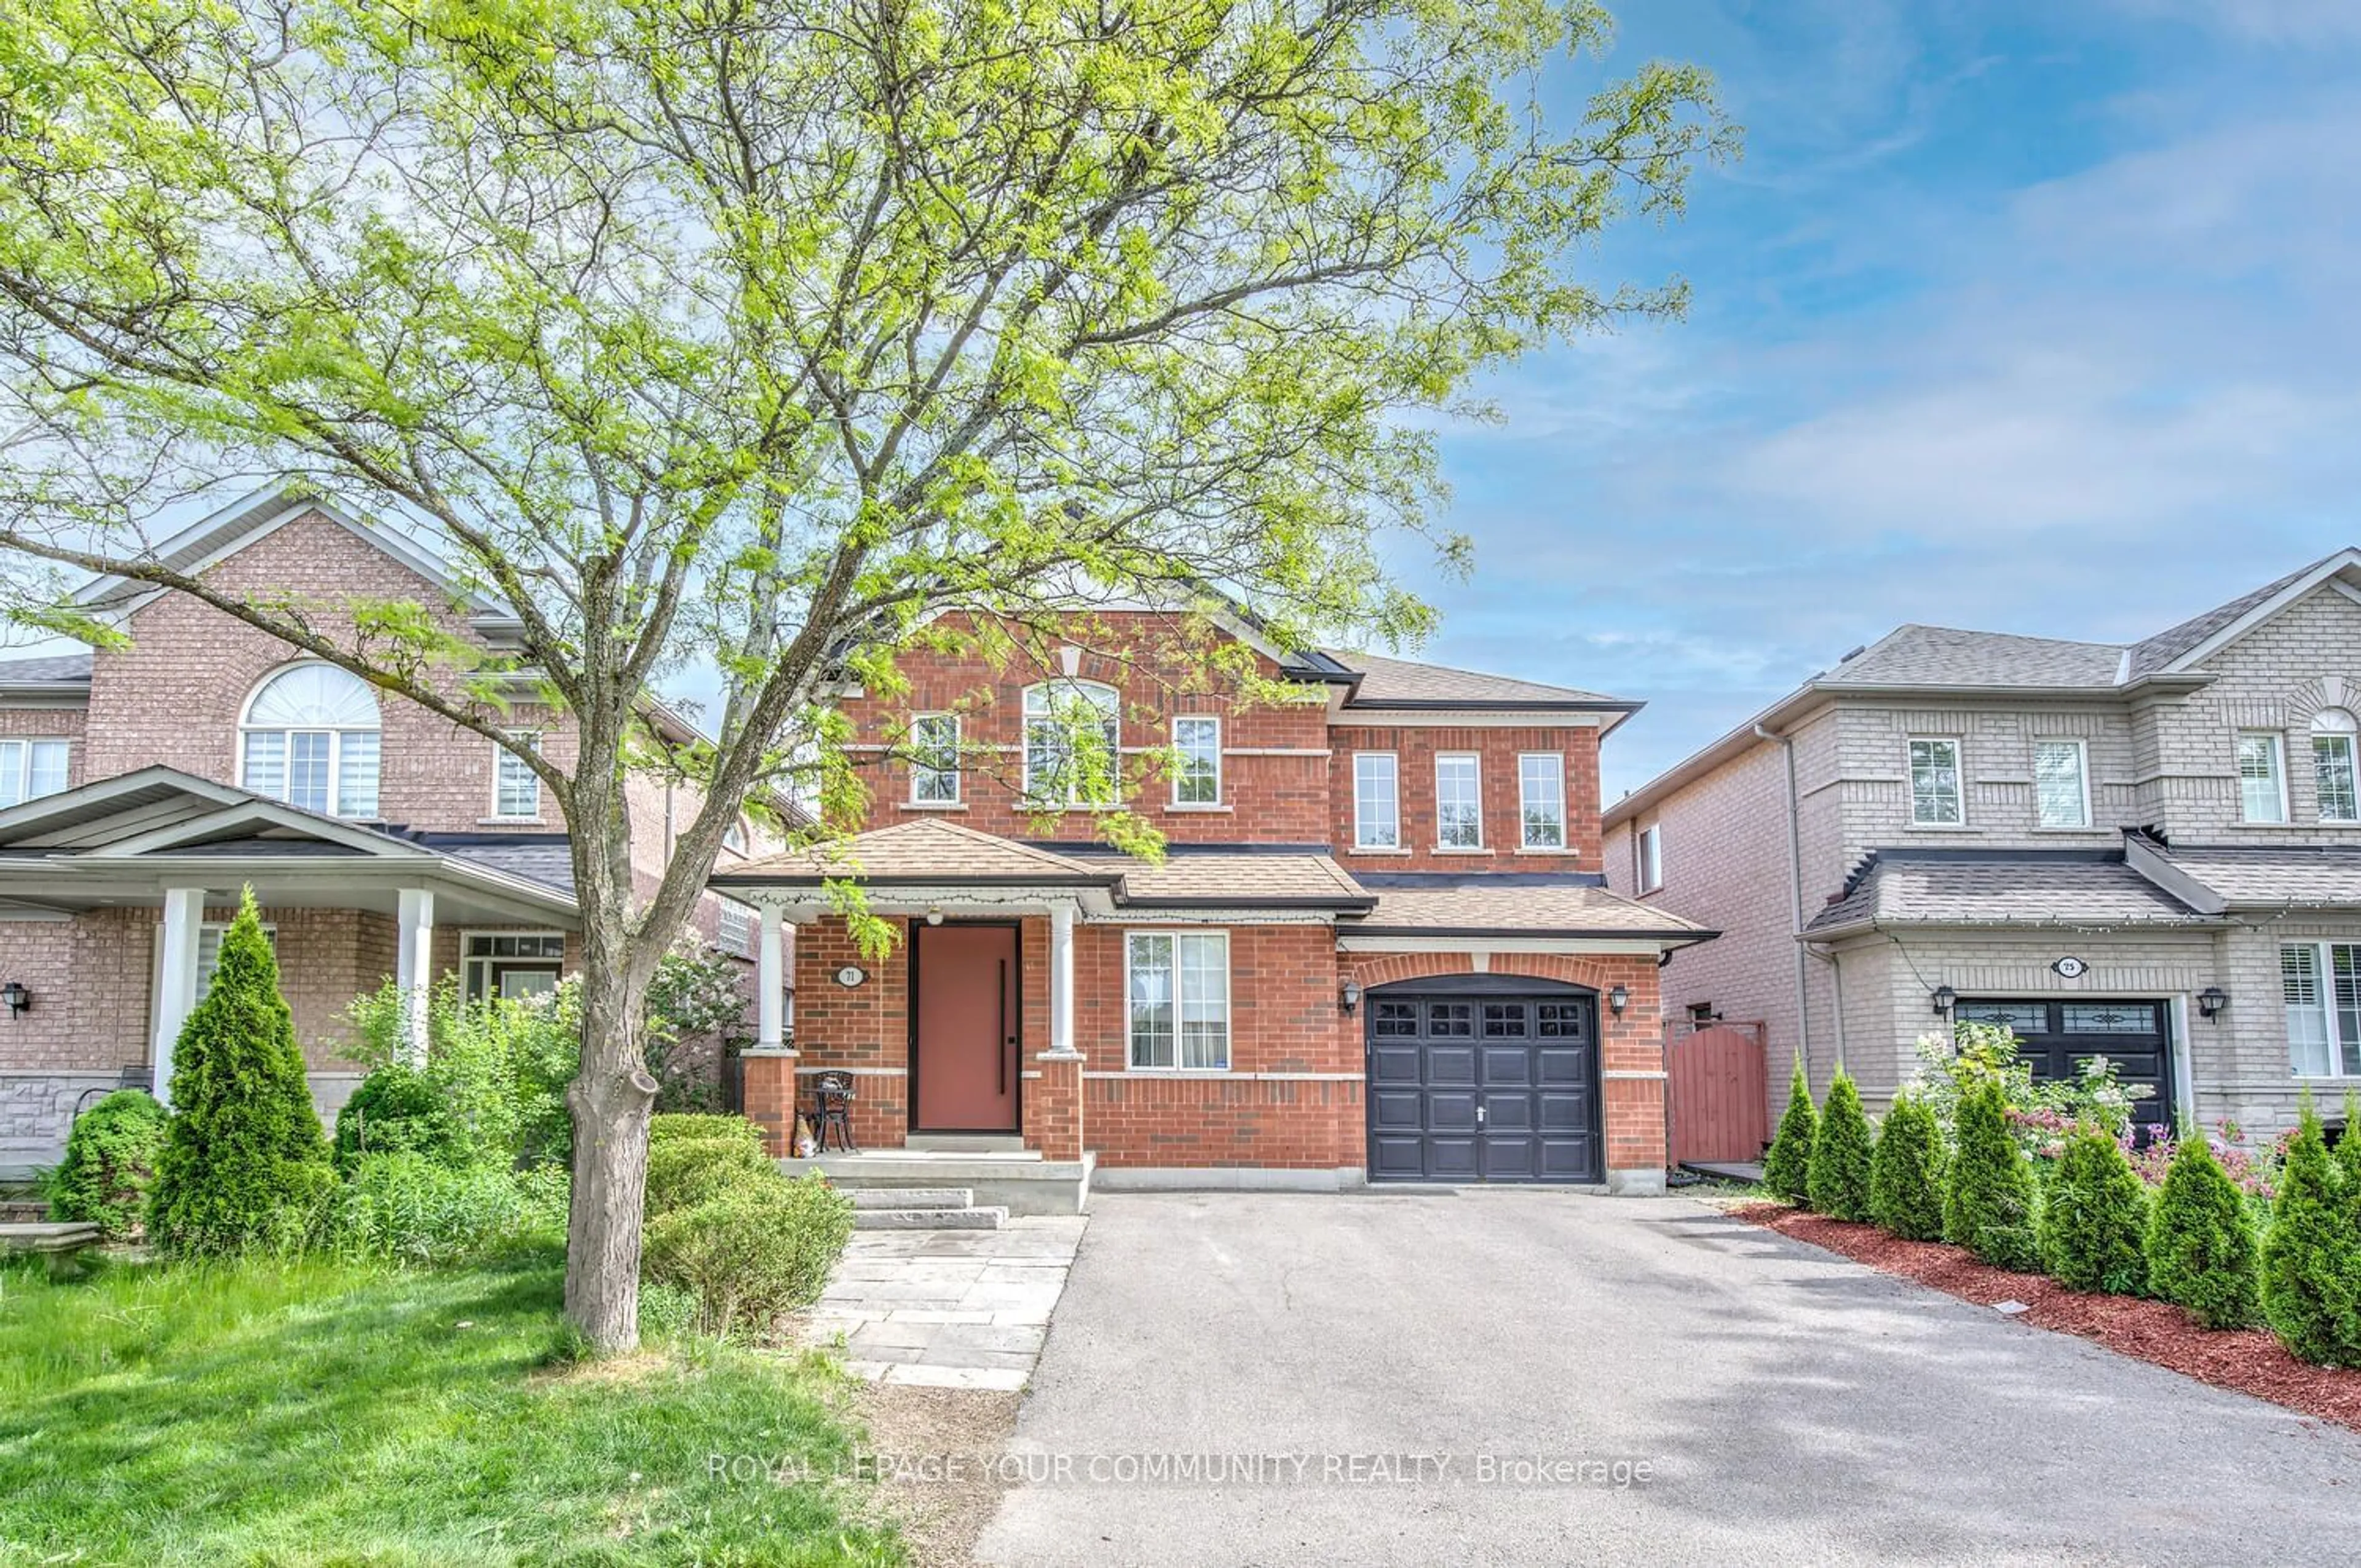 Home with brick exterior material for 71 Queensbridge Dr, Vaughan Ontario L4K 5T1